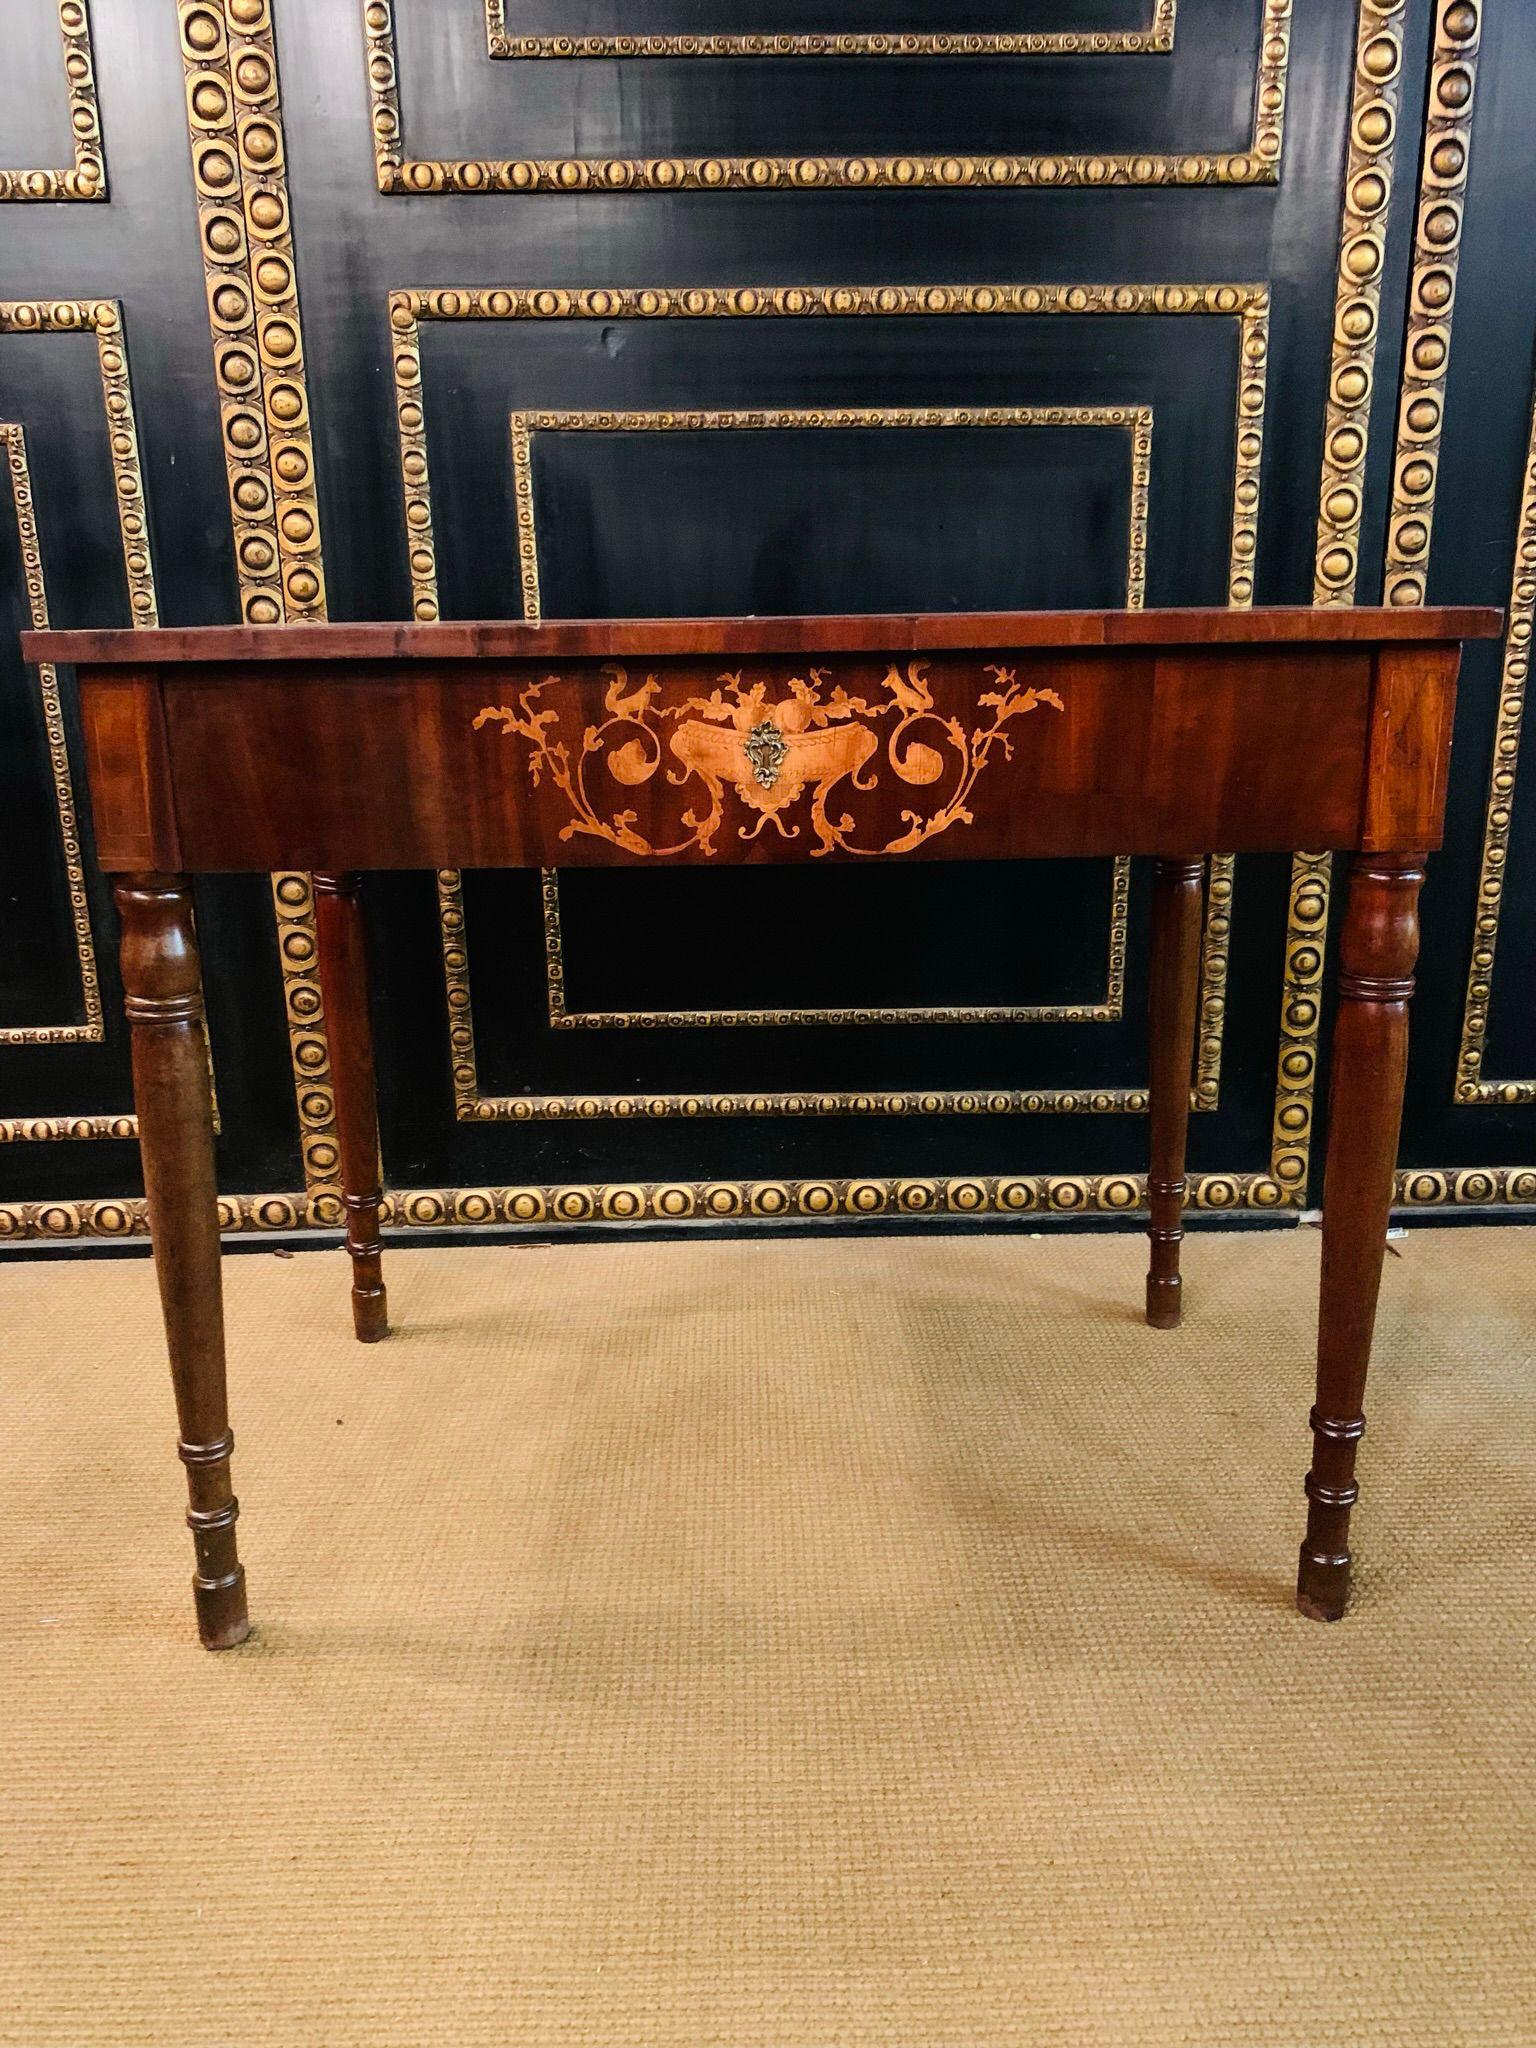 19th century Classic desk Biedermeier Solid wood and mahogany veneer. Longitudinal rectangular table top with one drawers, cut-out frame for legroom and square legs tapering downwards. Nice patina, hand polish with shella.
 